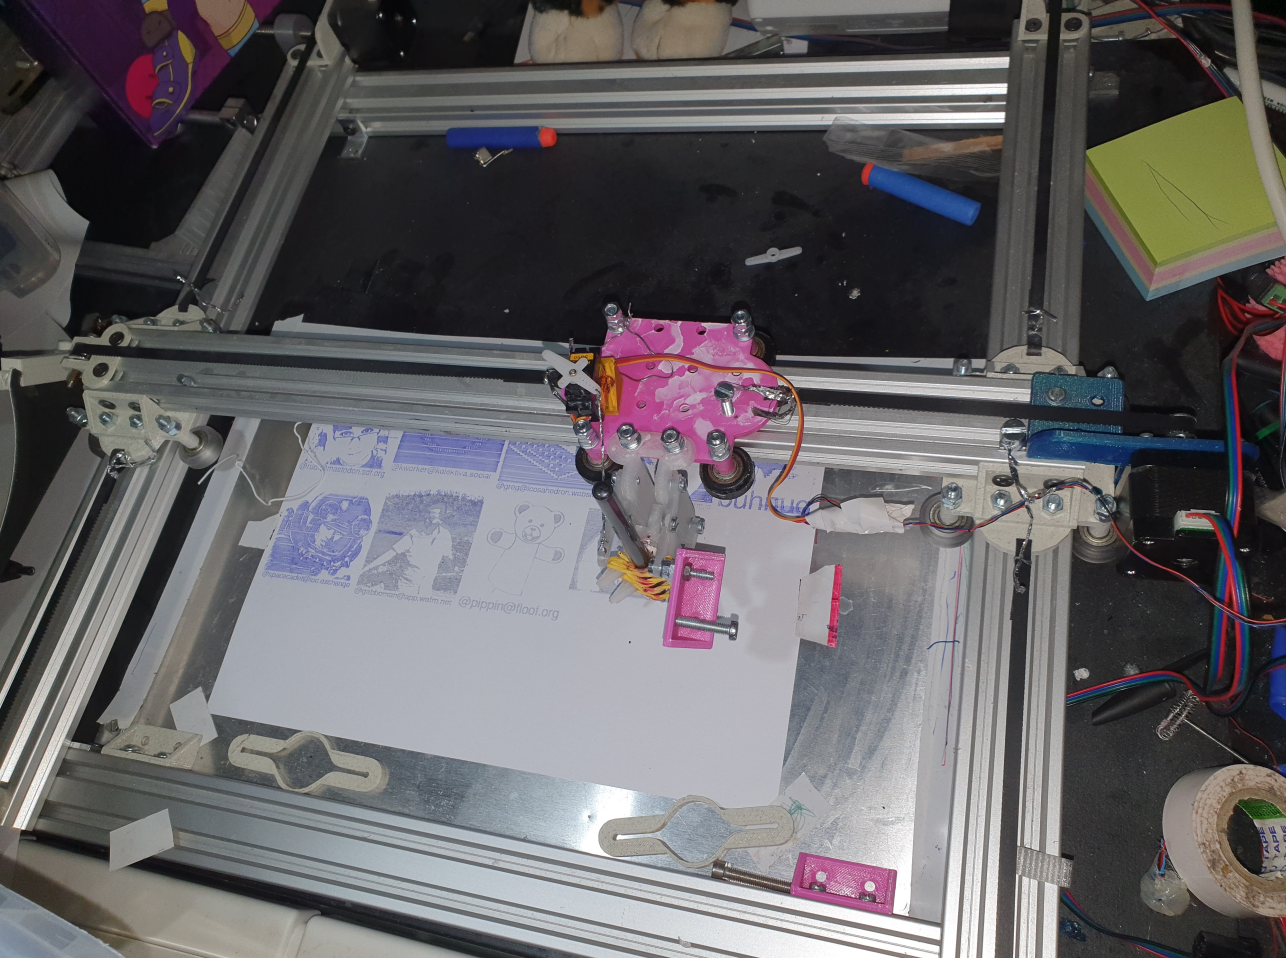 A pen plotter consisting of aluminum extrusions and 3D printed wheels with 2 Y motors and one X motor and a servo lifting and putting down a pen and an A4 pages is being plotted on below it